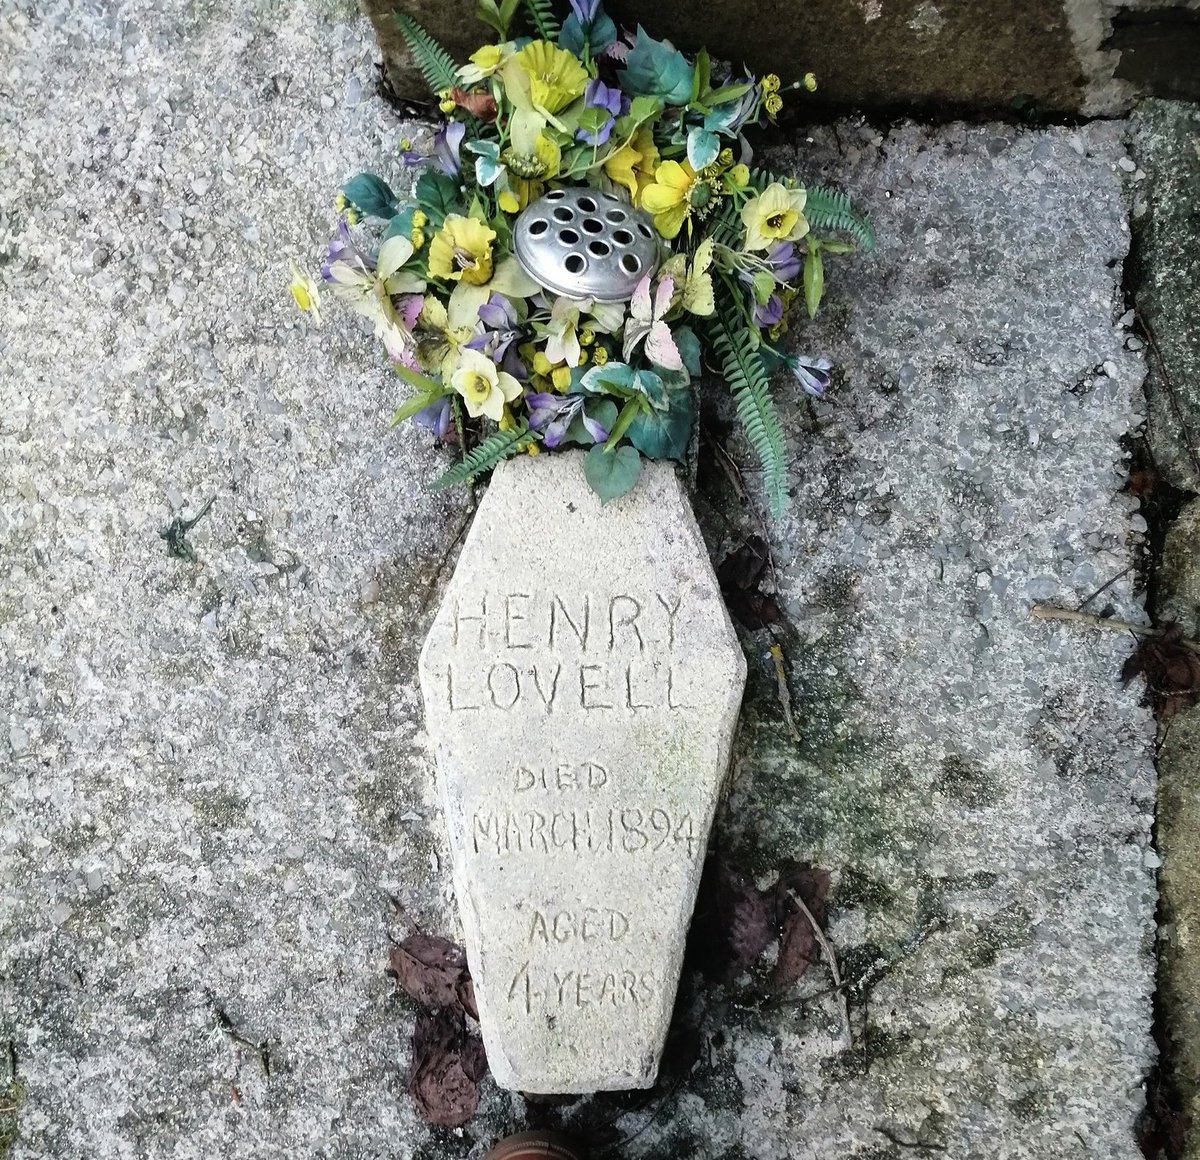 Wishing you a wonderful #GRTHM 📜 

Take a moment to remember this little guy who died of pneumonia in 1894.

He came from a well-known travelling family and is buried in Llanllwni. 

Henry Lovell
Died
March 1894
4 years

💖

#Wales #History